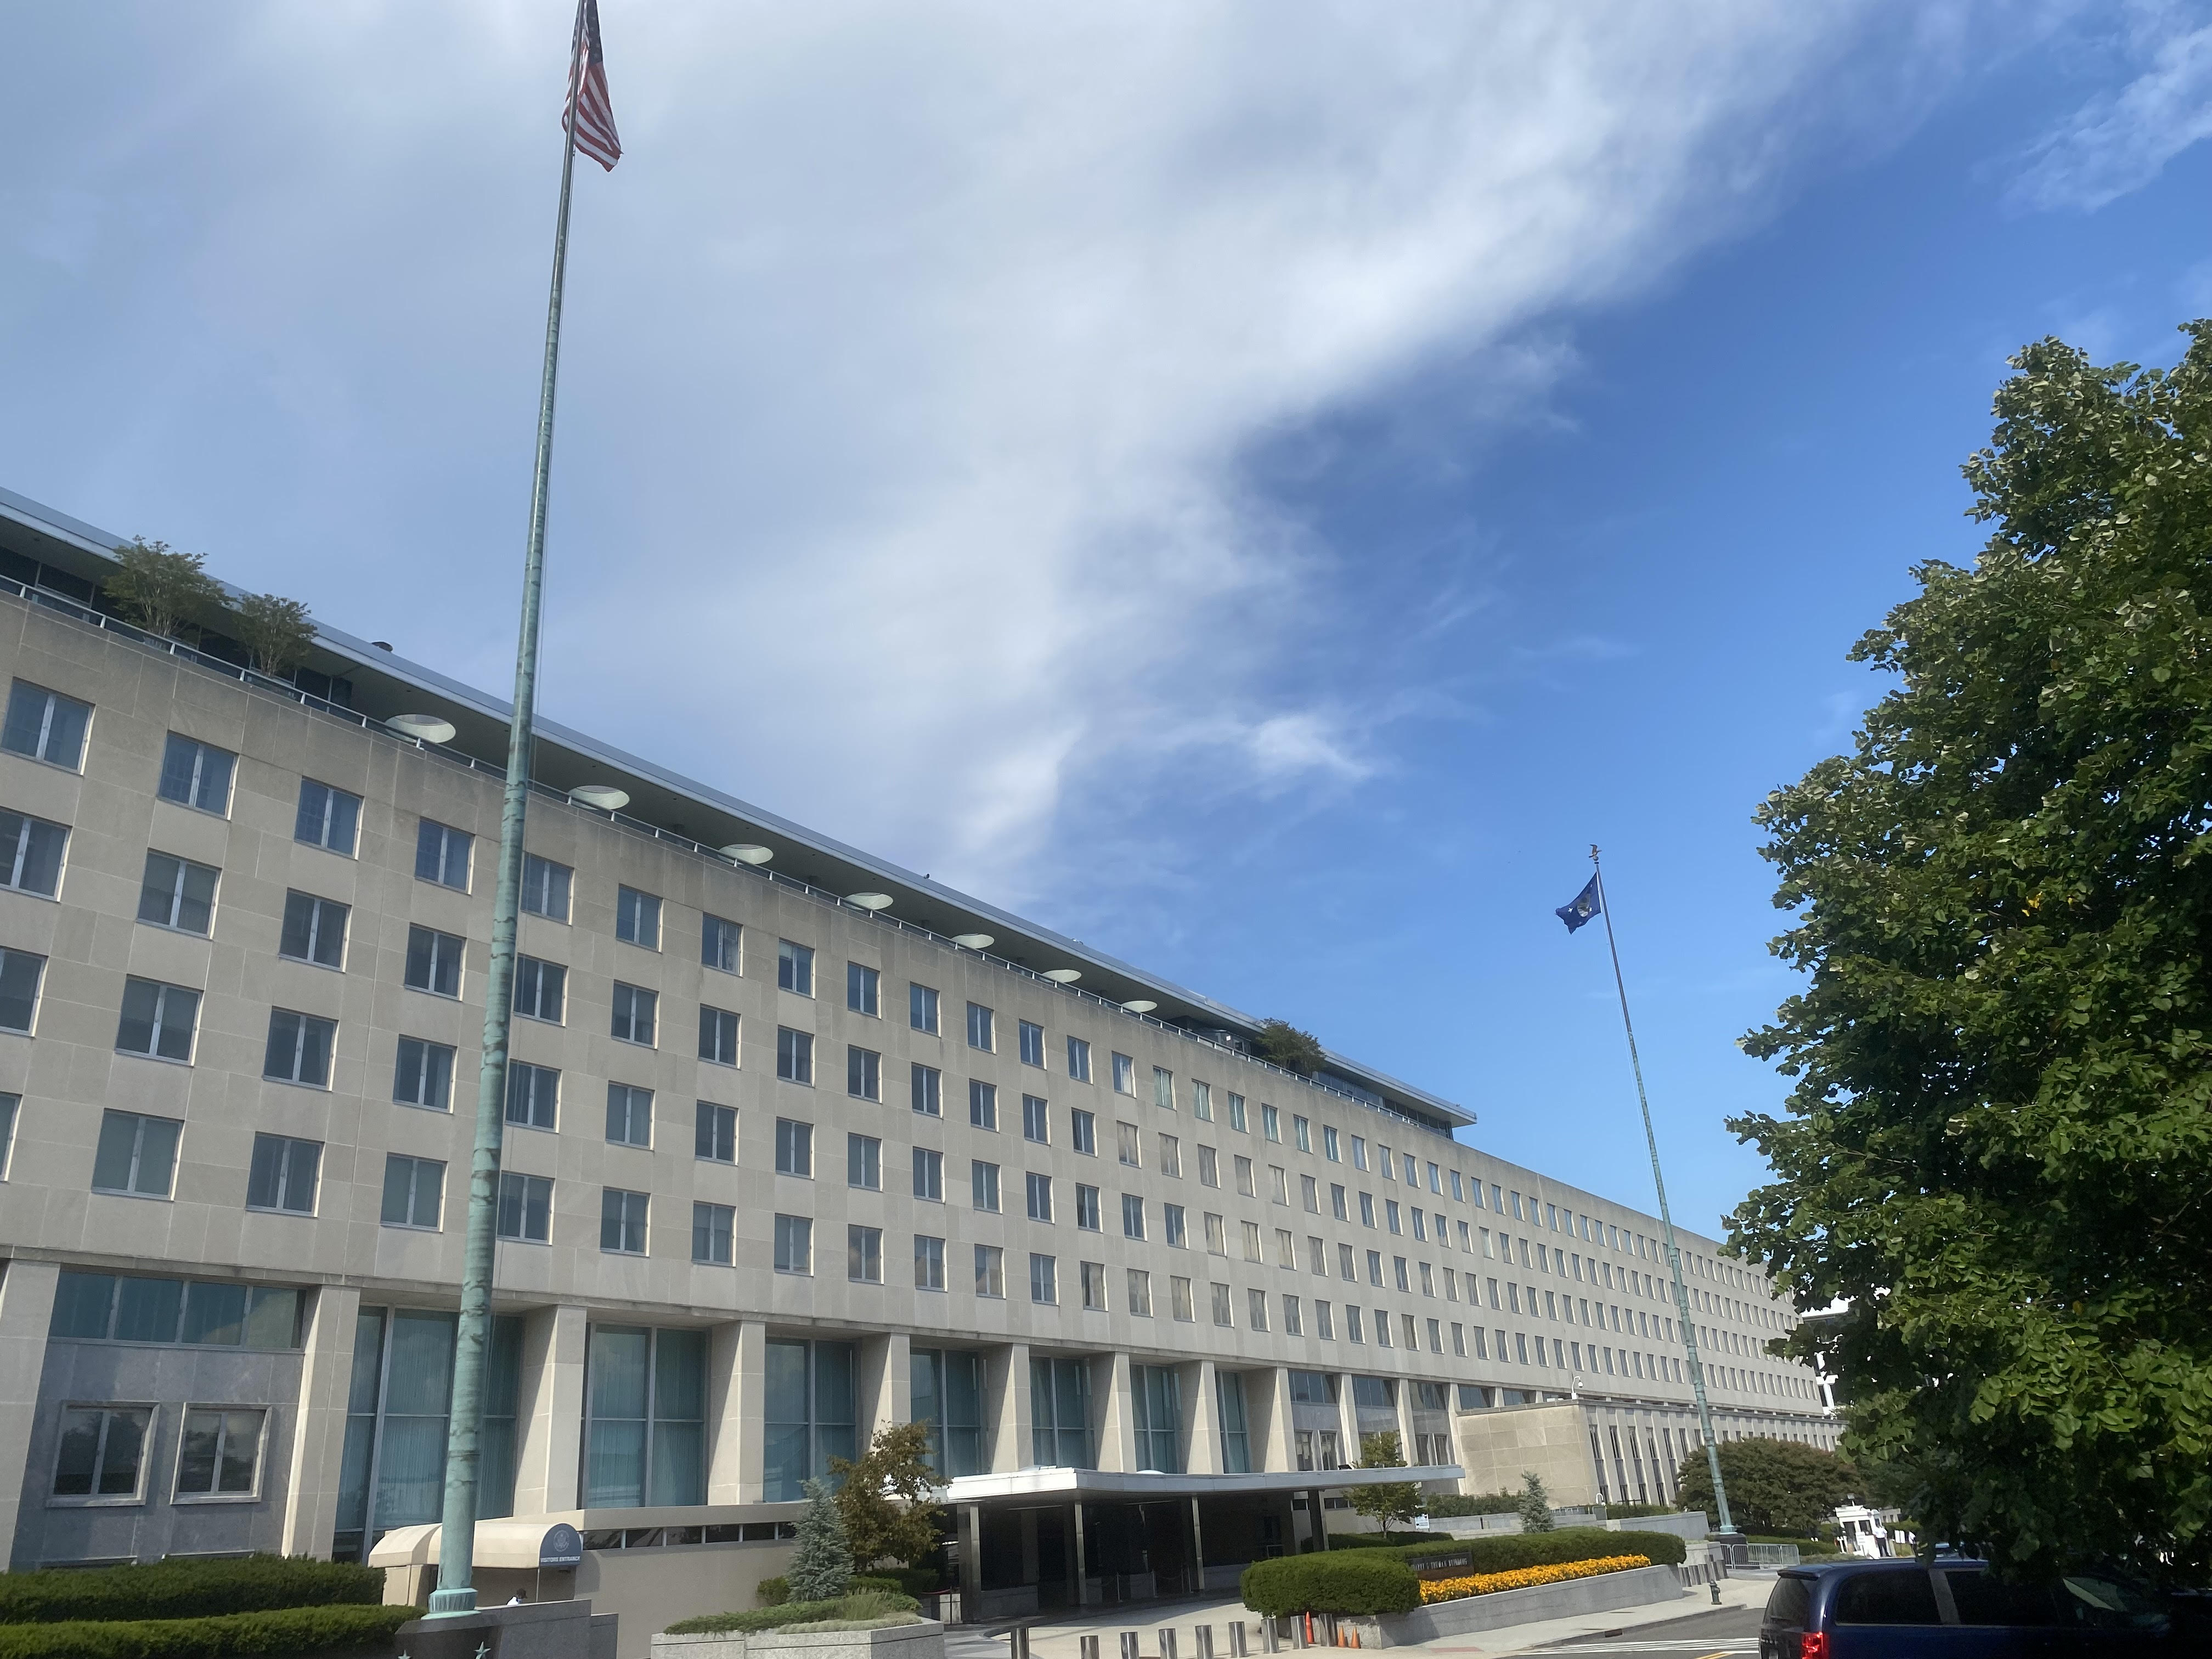 The Harry S. Truman Building, home of the US Department of State, in Washington, DC. The Office of the Historian is adjacent on Navy Hill.